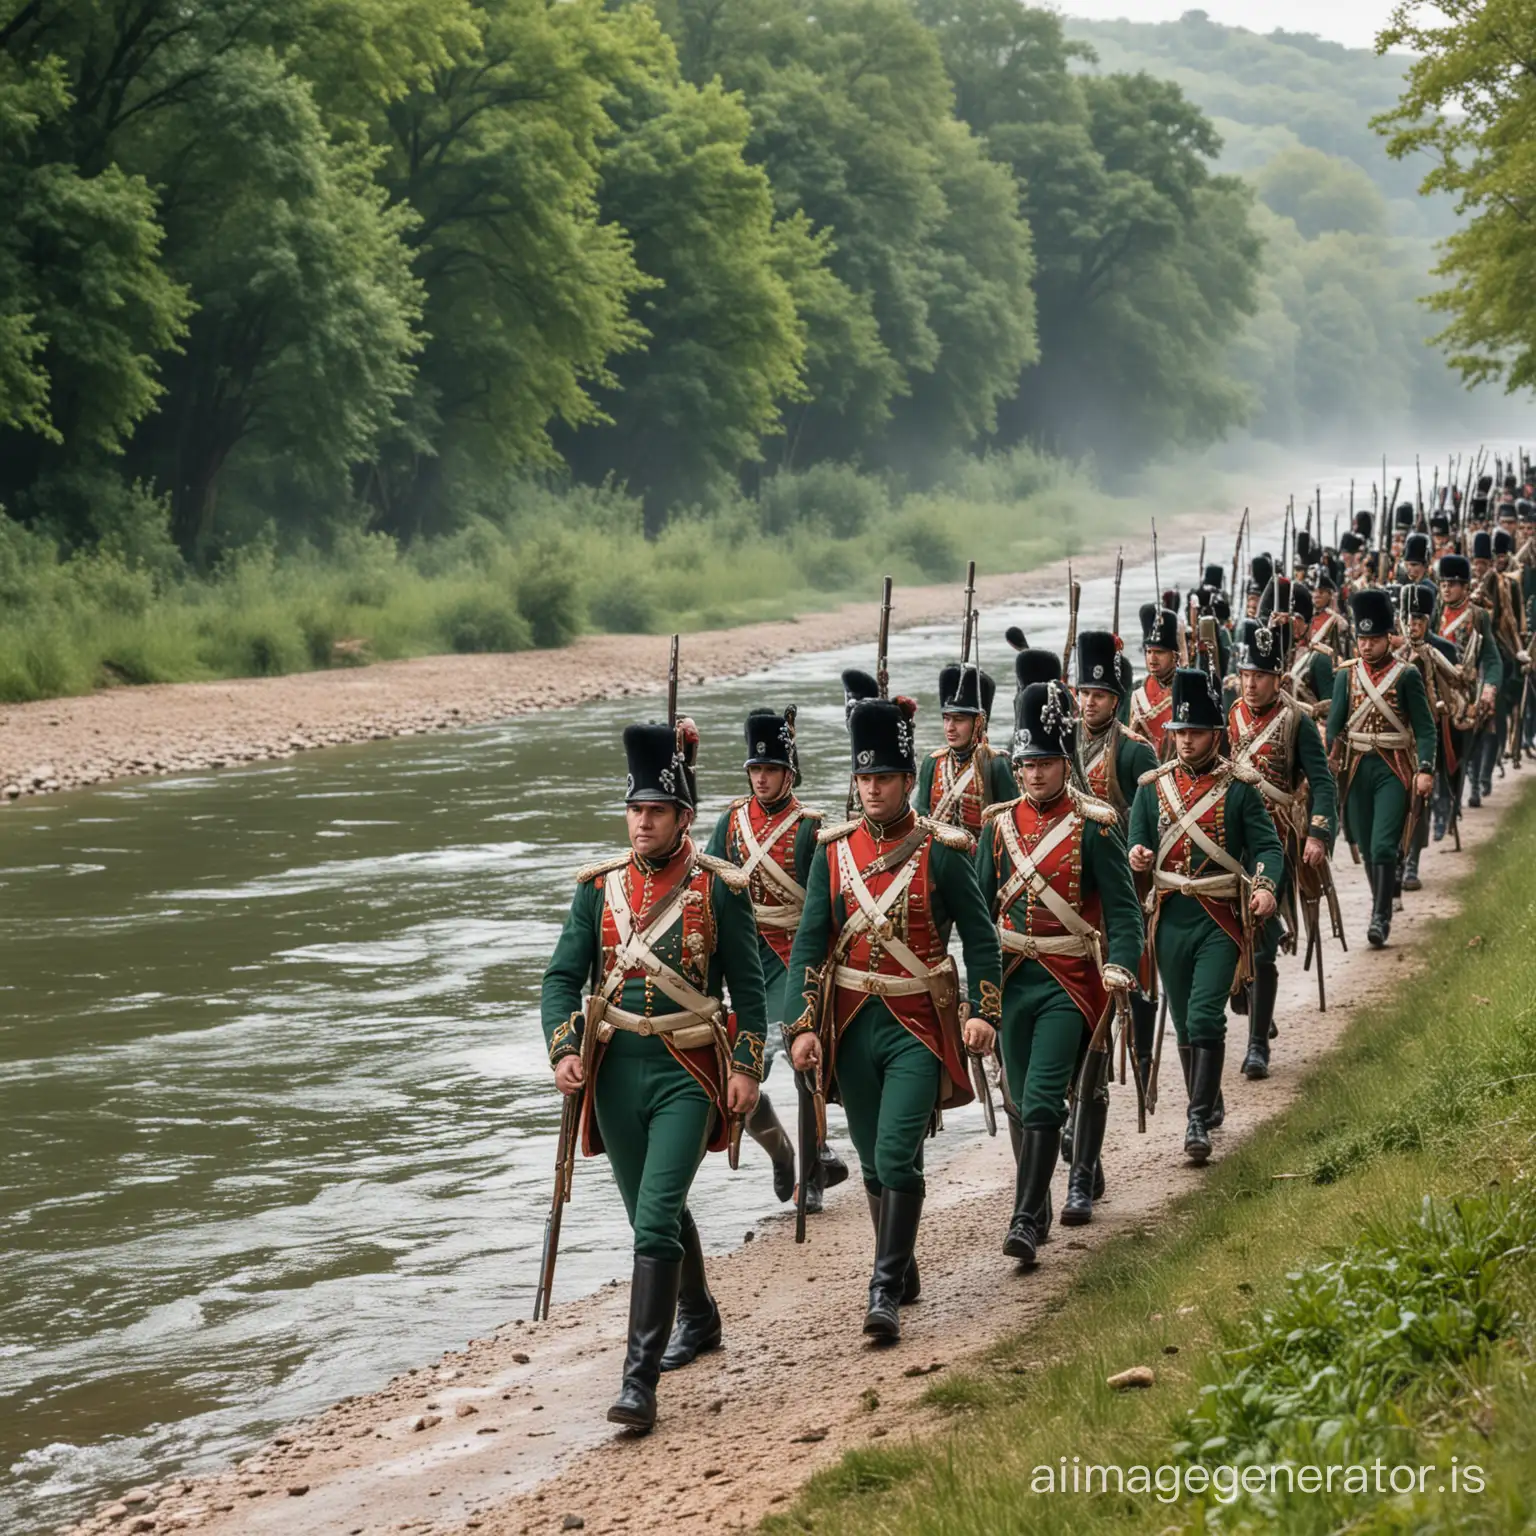 Napoleonic-War-Soldiers-Marching-Along-Riverbank-in-Green-Coats